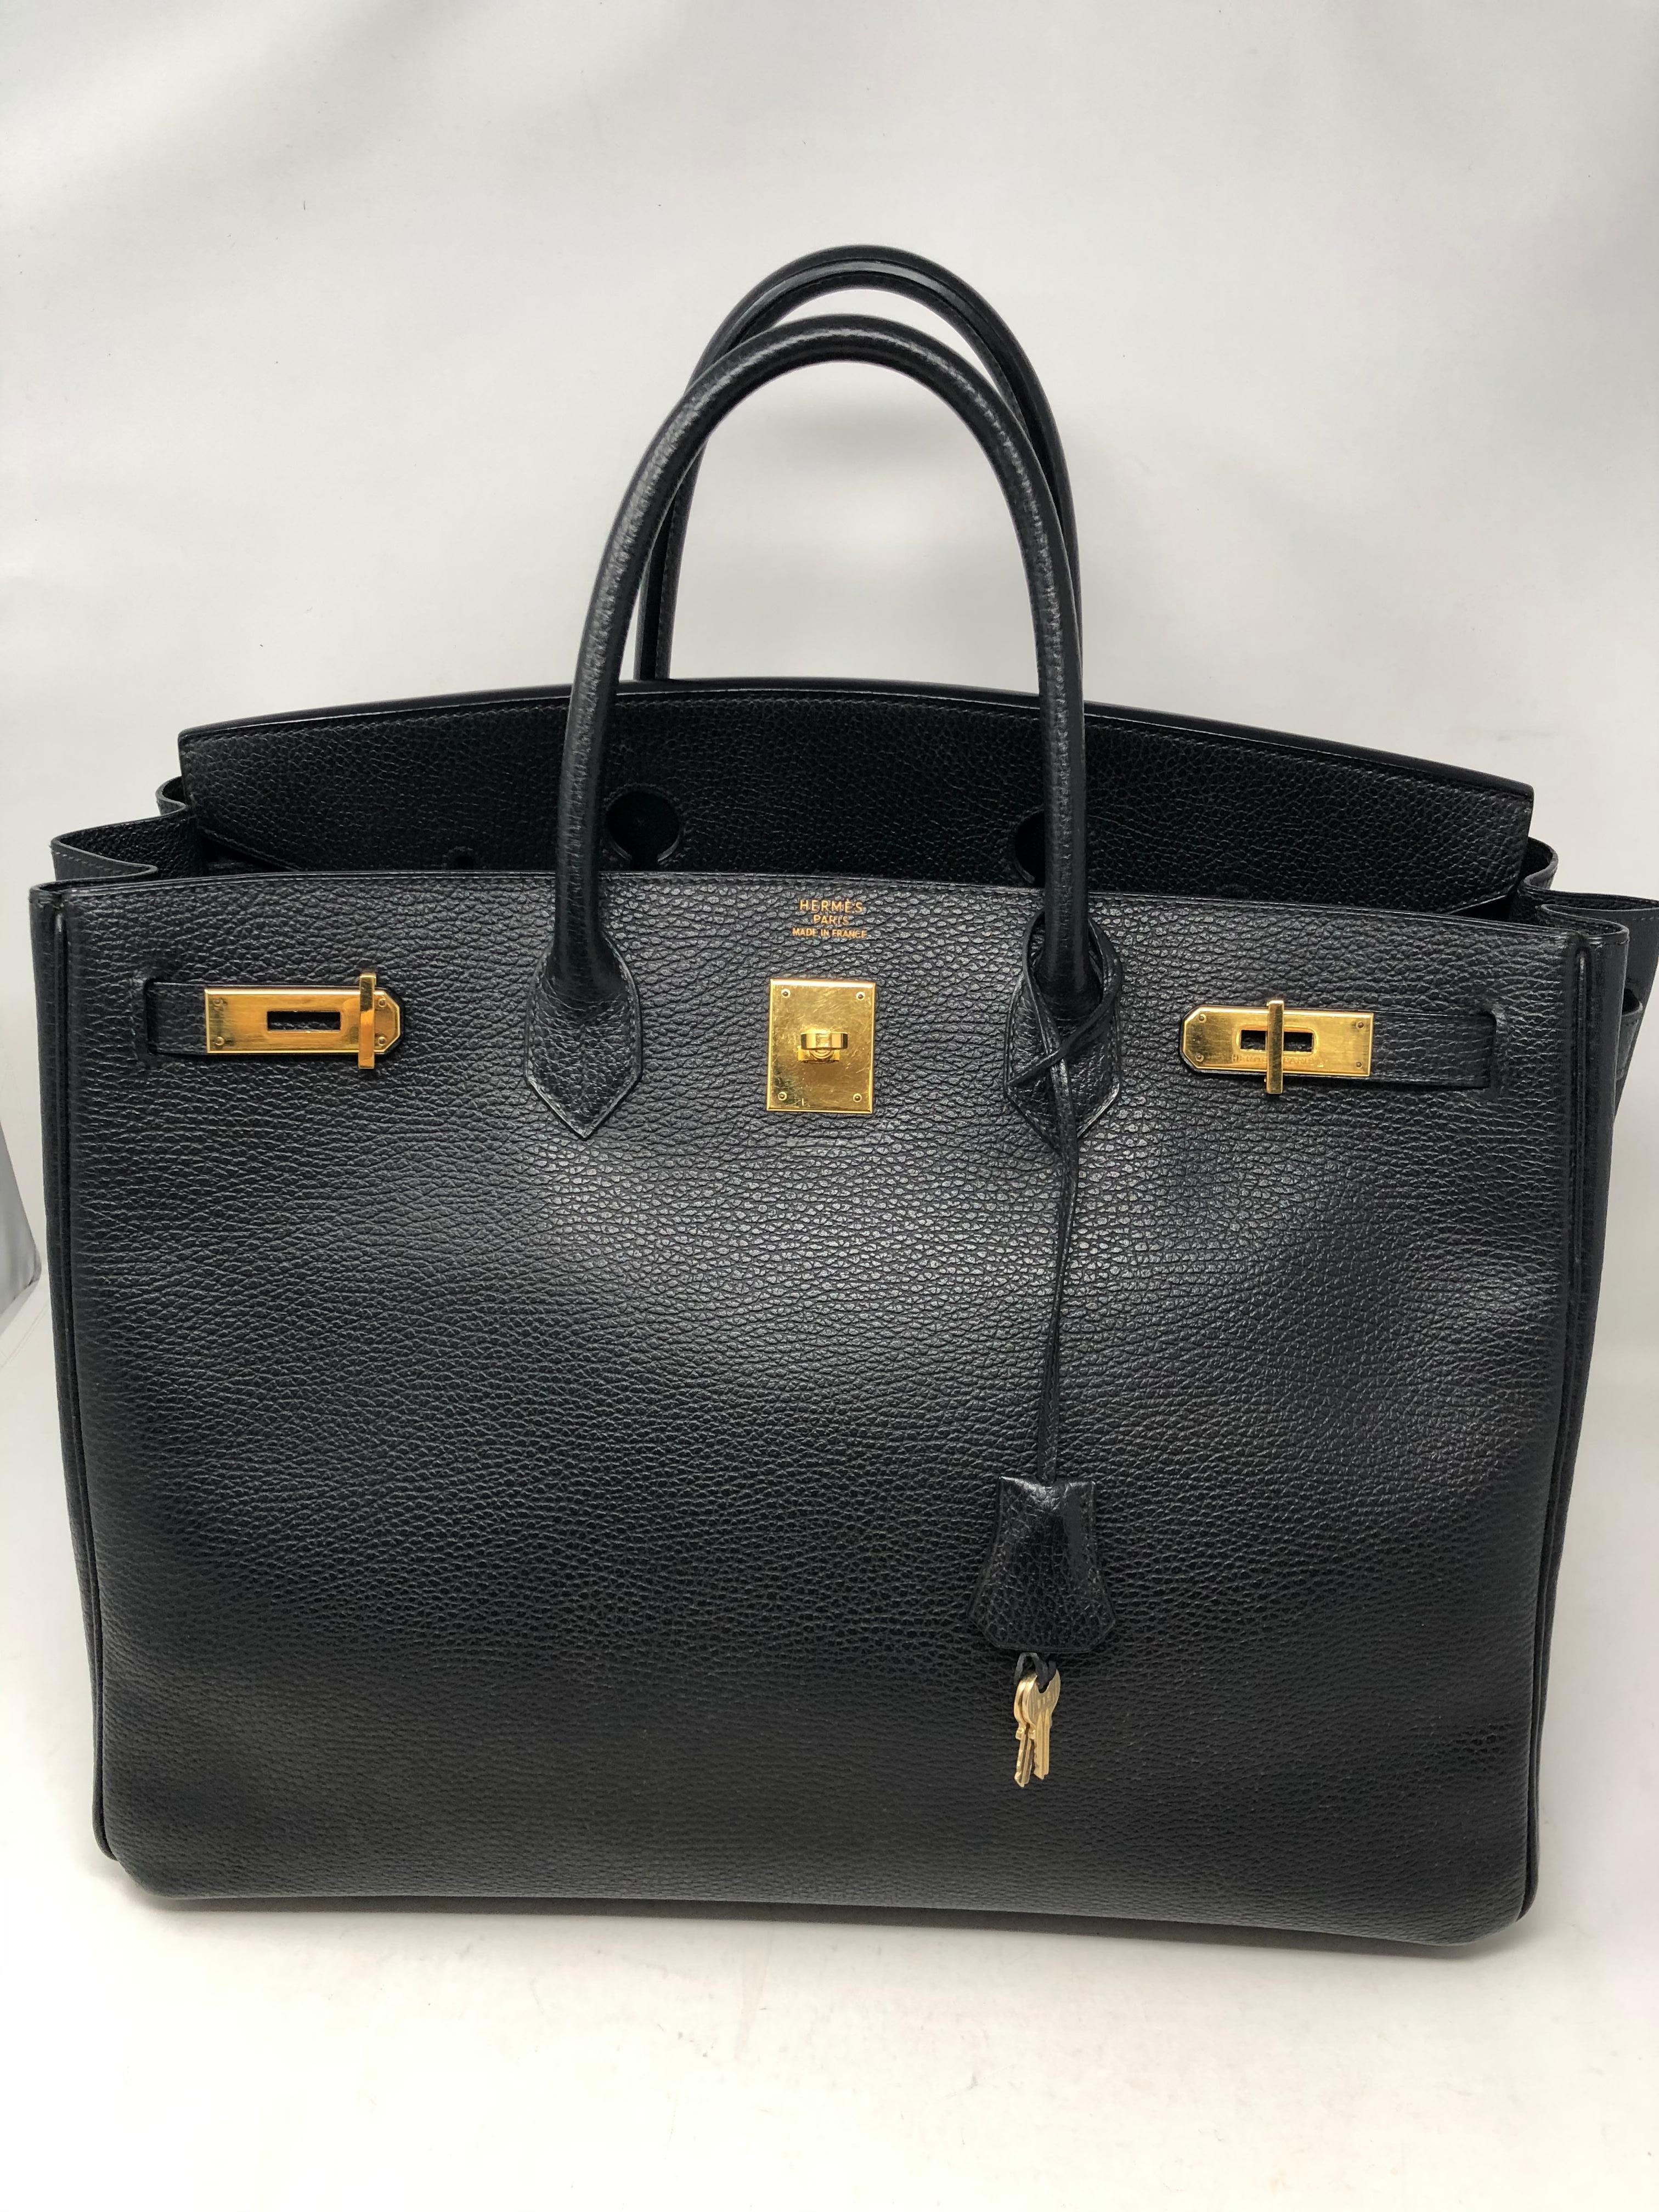 Hermes Black Birkin 40 Ardennes Leather. Gold hardware. Good condition for vintage. Retired size. Clean interior. Has great structure. Includes clochette, lock and keys. Hermes dustcover included. Guaranteed authentic. 